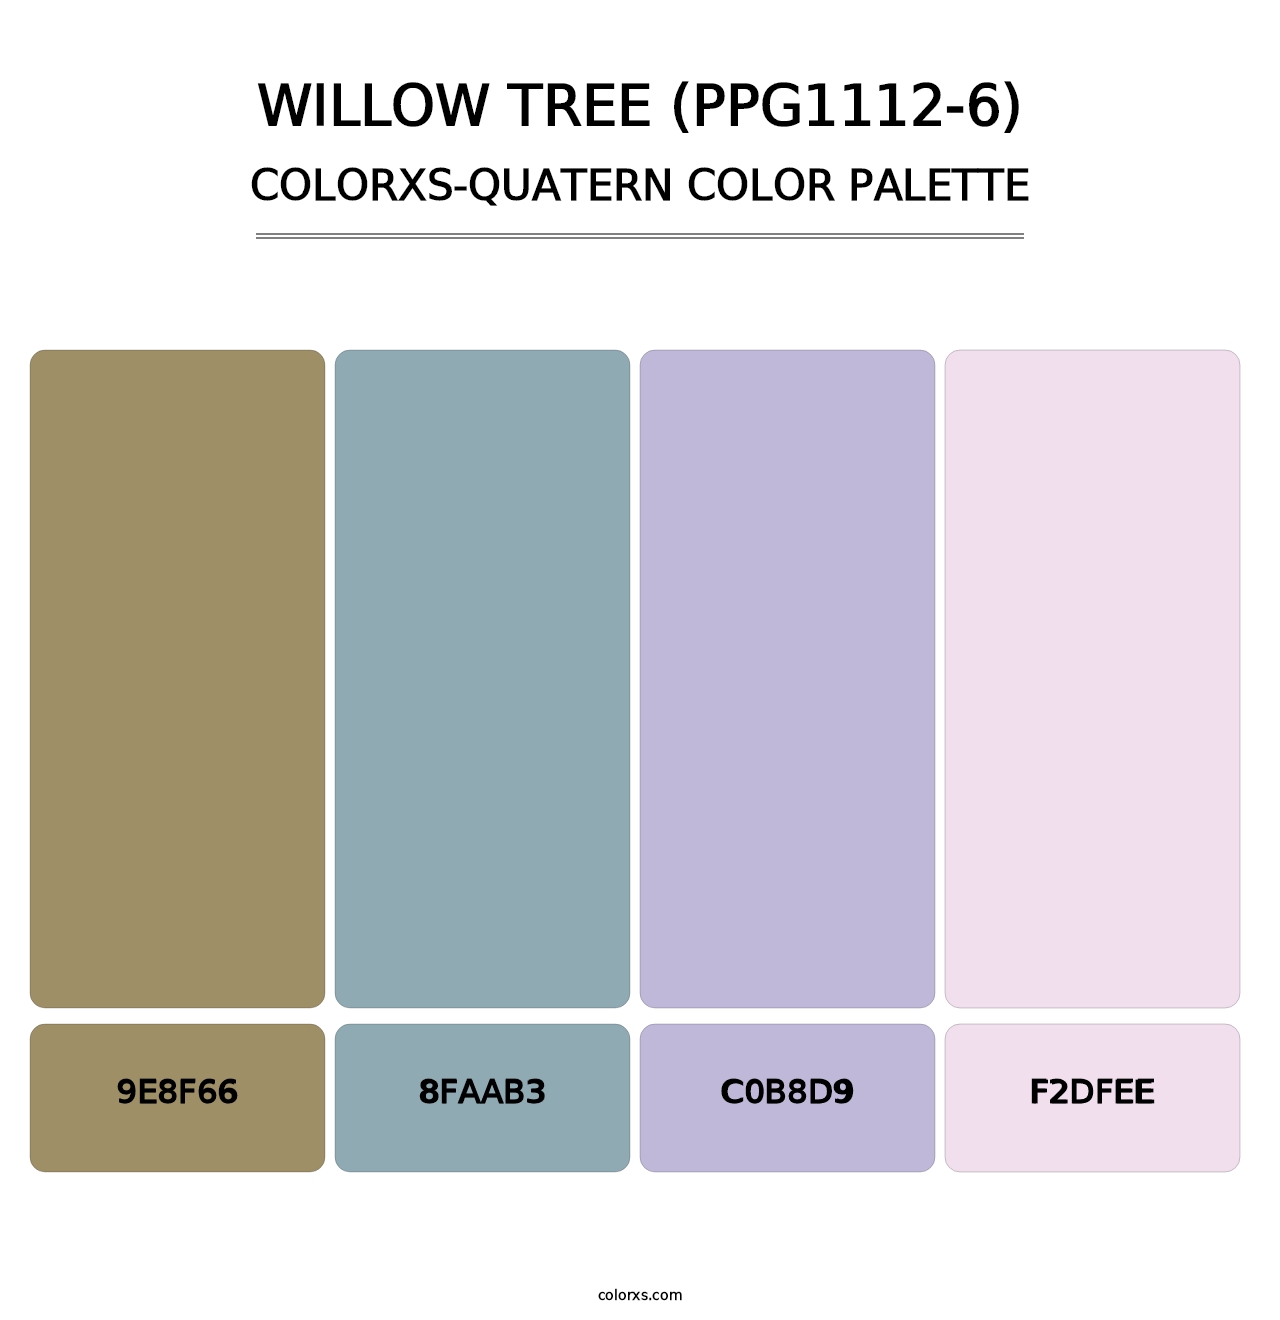 Willow Tree (PPG1112-6) - Colorxs Quatern Palette